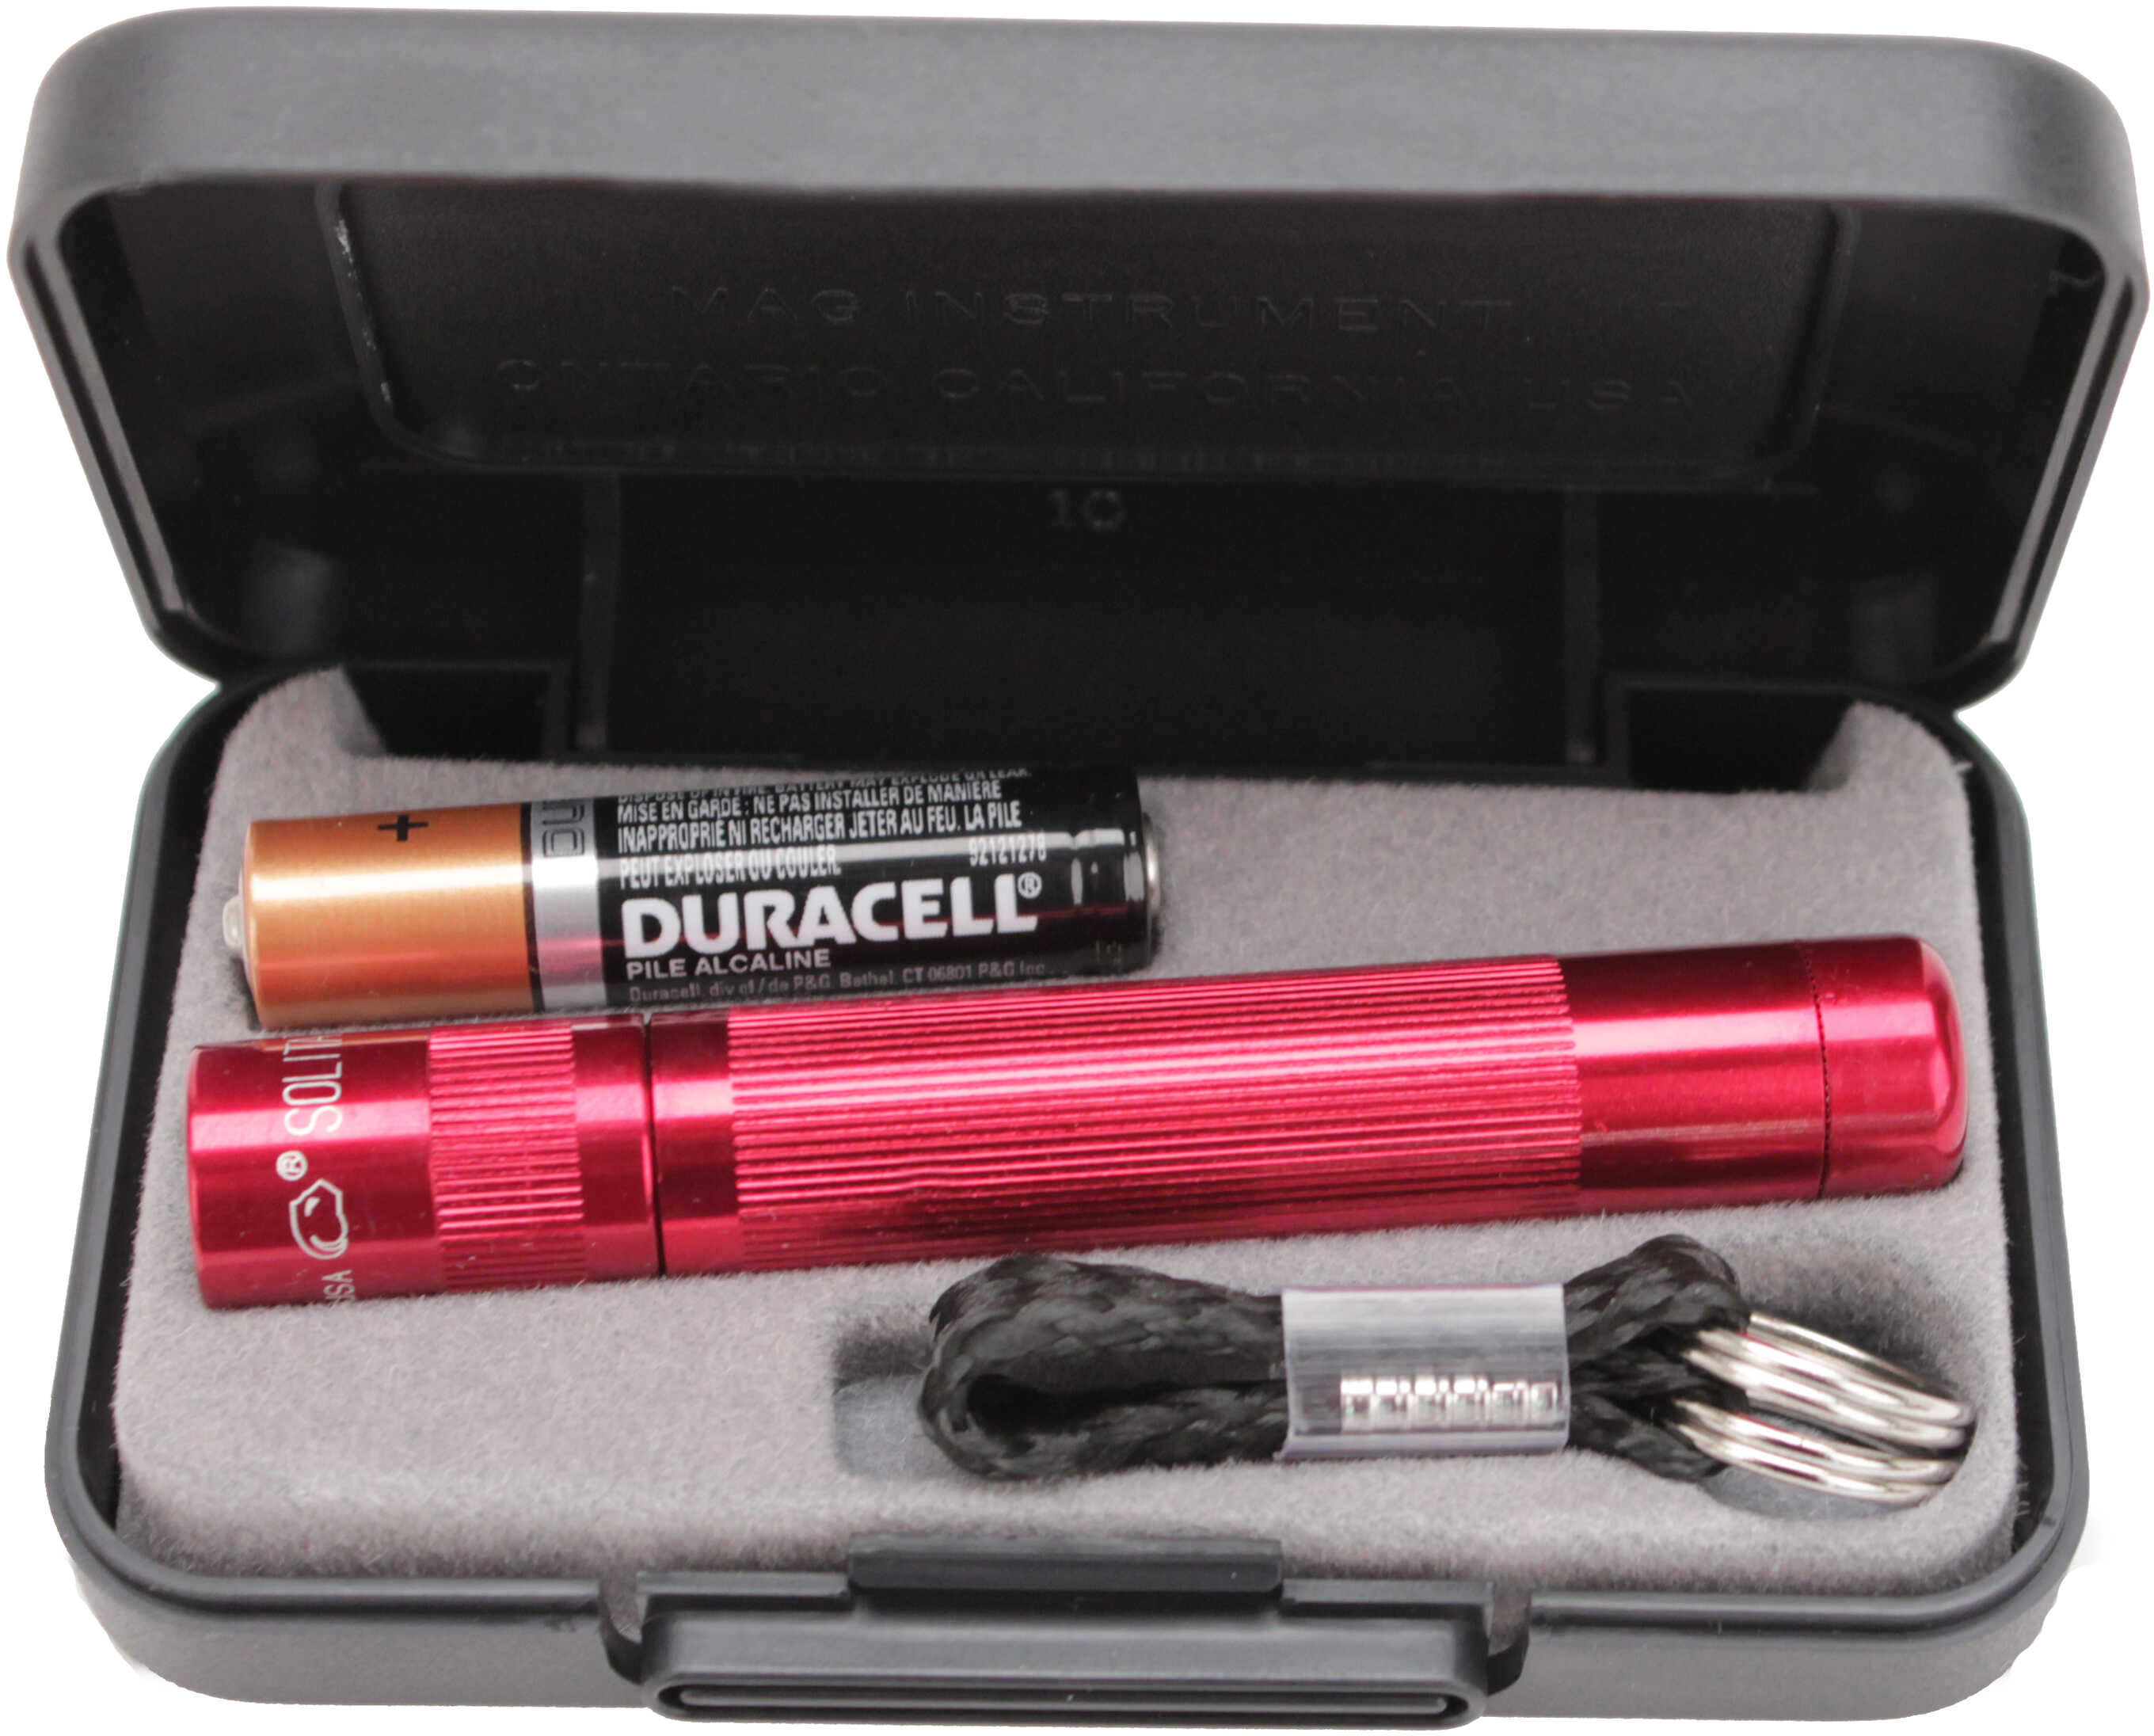 MagLite Solitaire LED AAA Flashlight Presentation Box Red